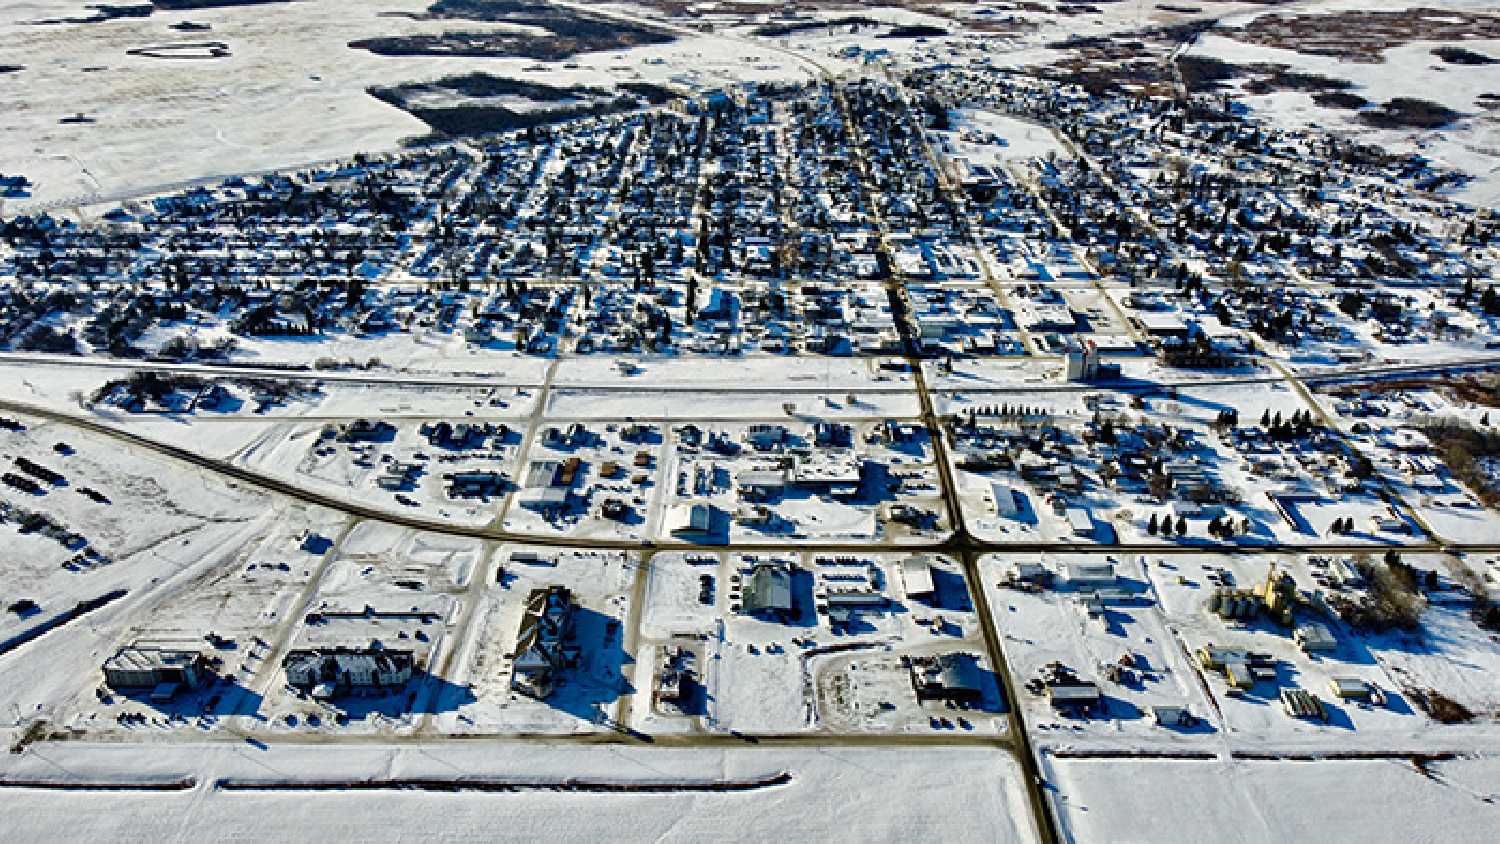 Kevin Weedmark took this drone picture of Moosomin on November 22, 2022.